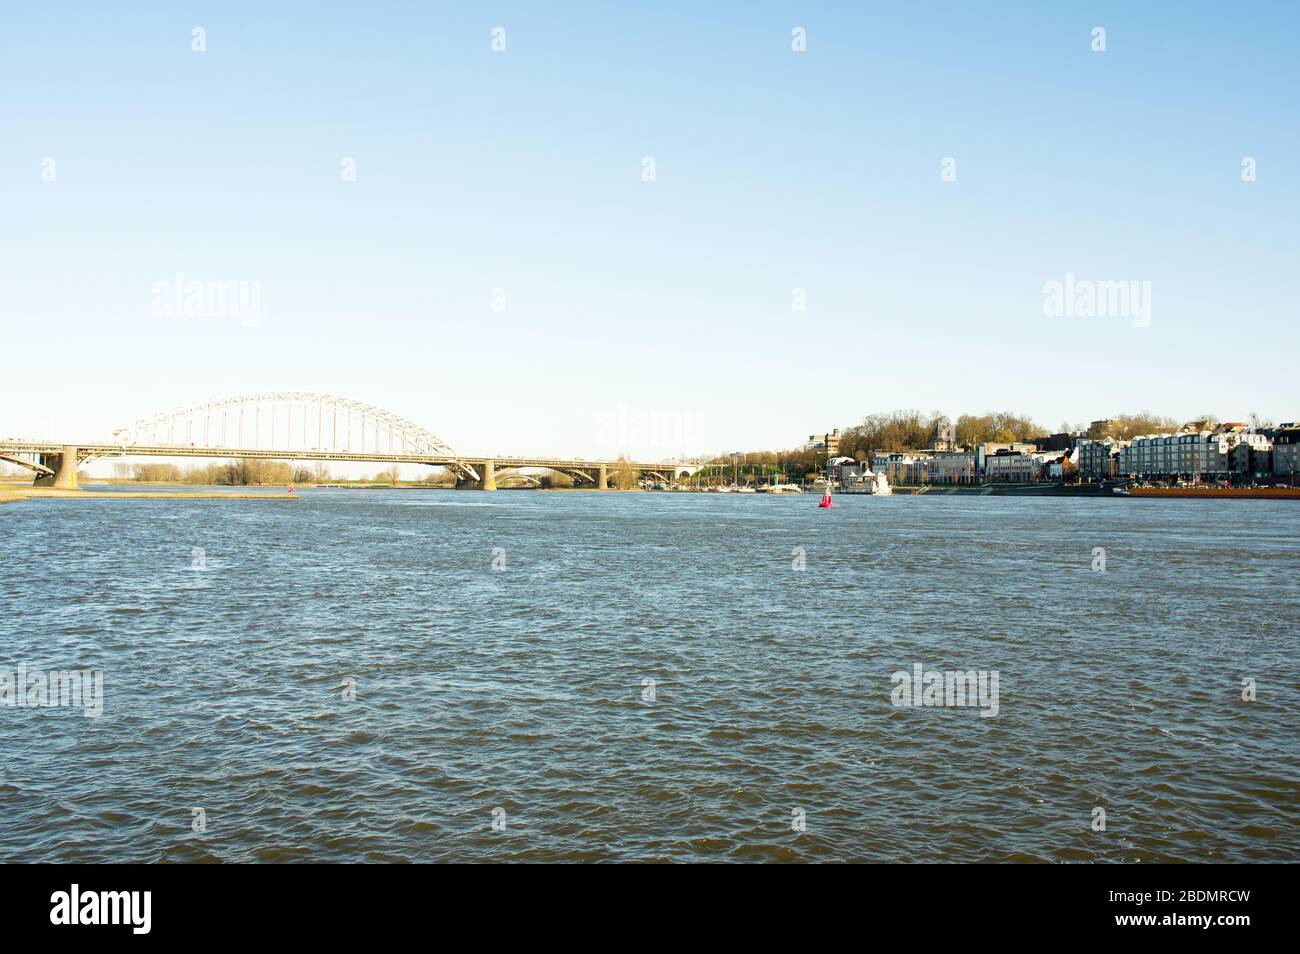 Cityscape of the city of Nijmegen with the bridge Waalbrug at the river Waal, Netherlands Stock Photo